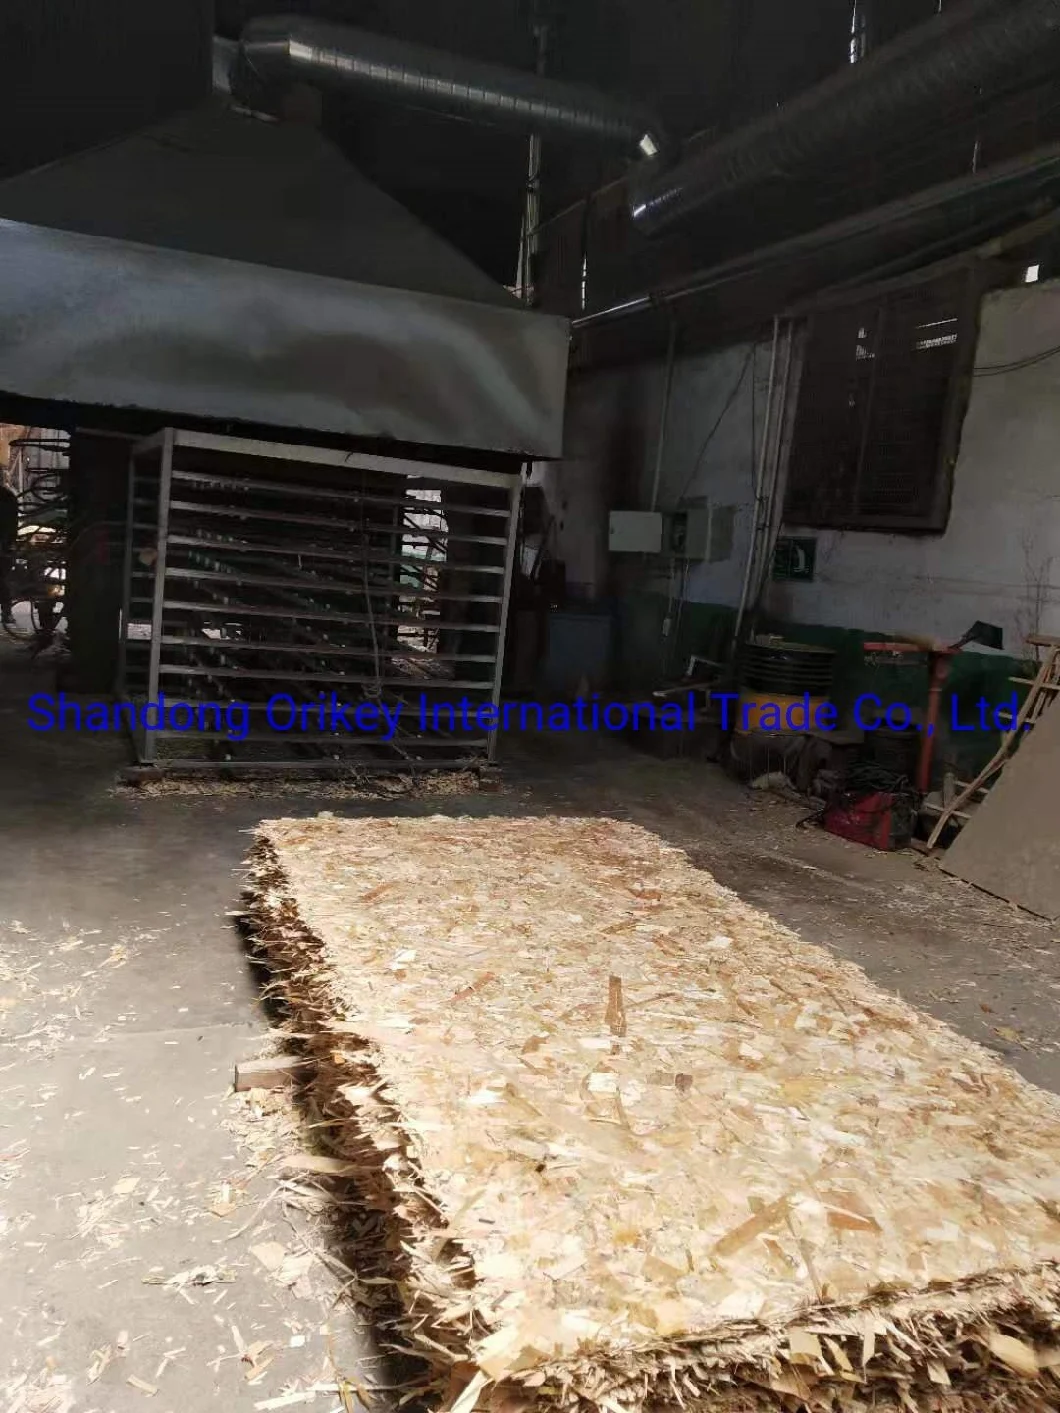 18mm OSB Oriented Starand Board for Construction From China Manufacture